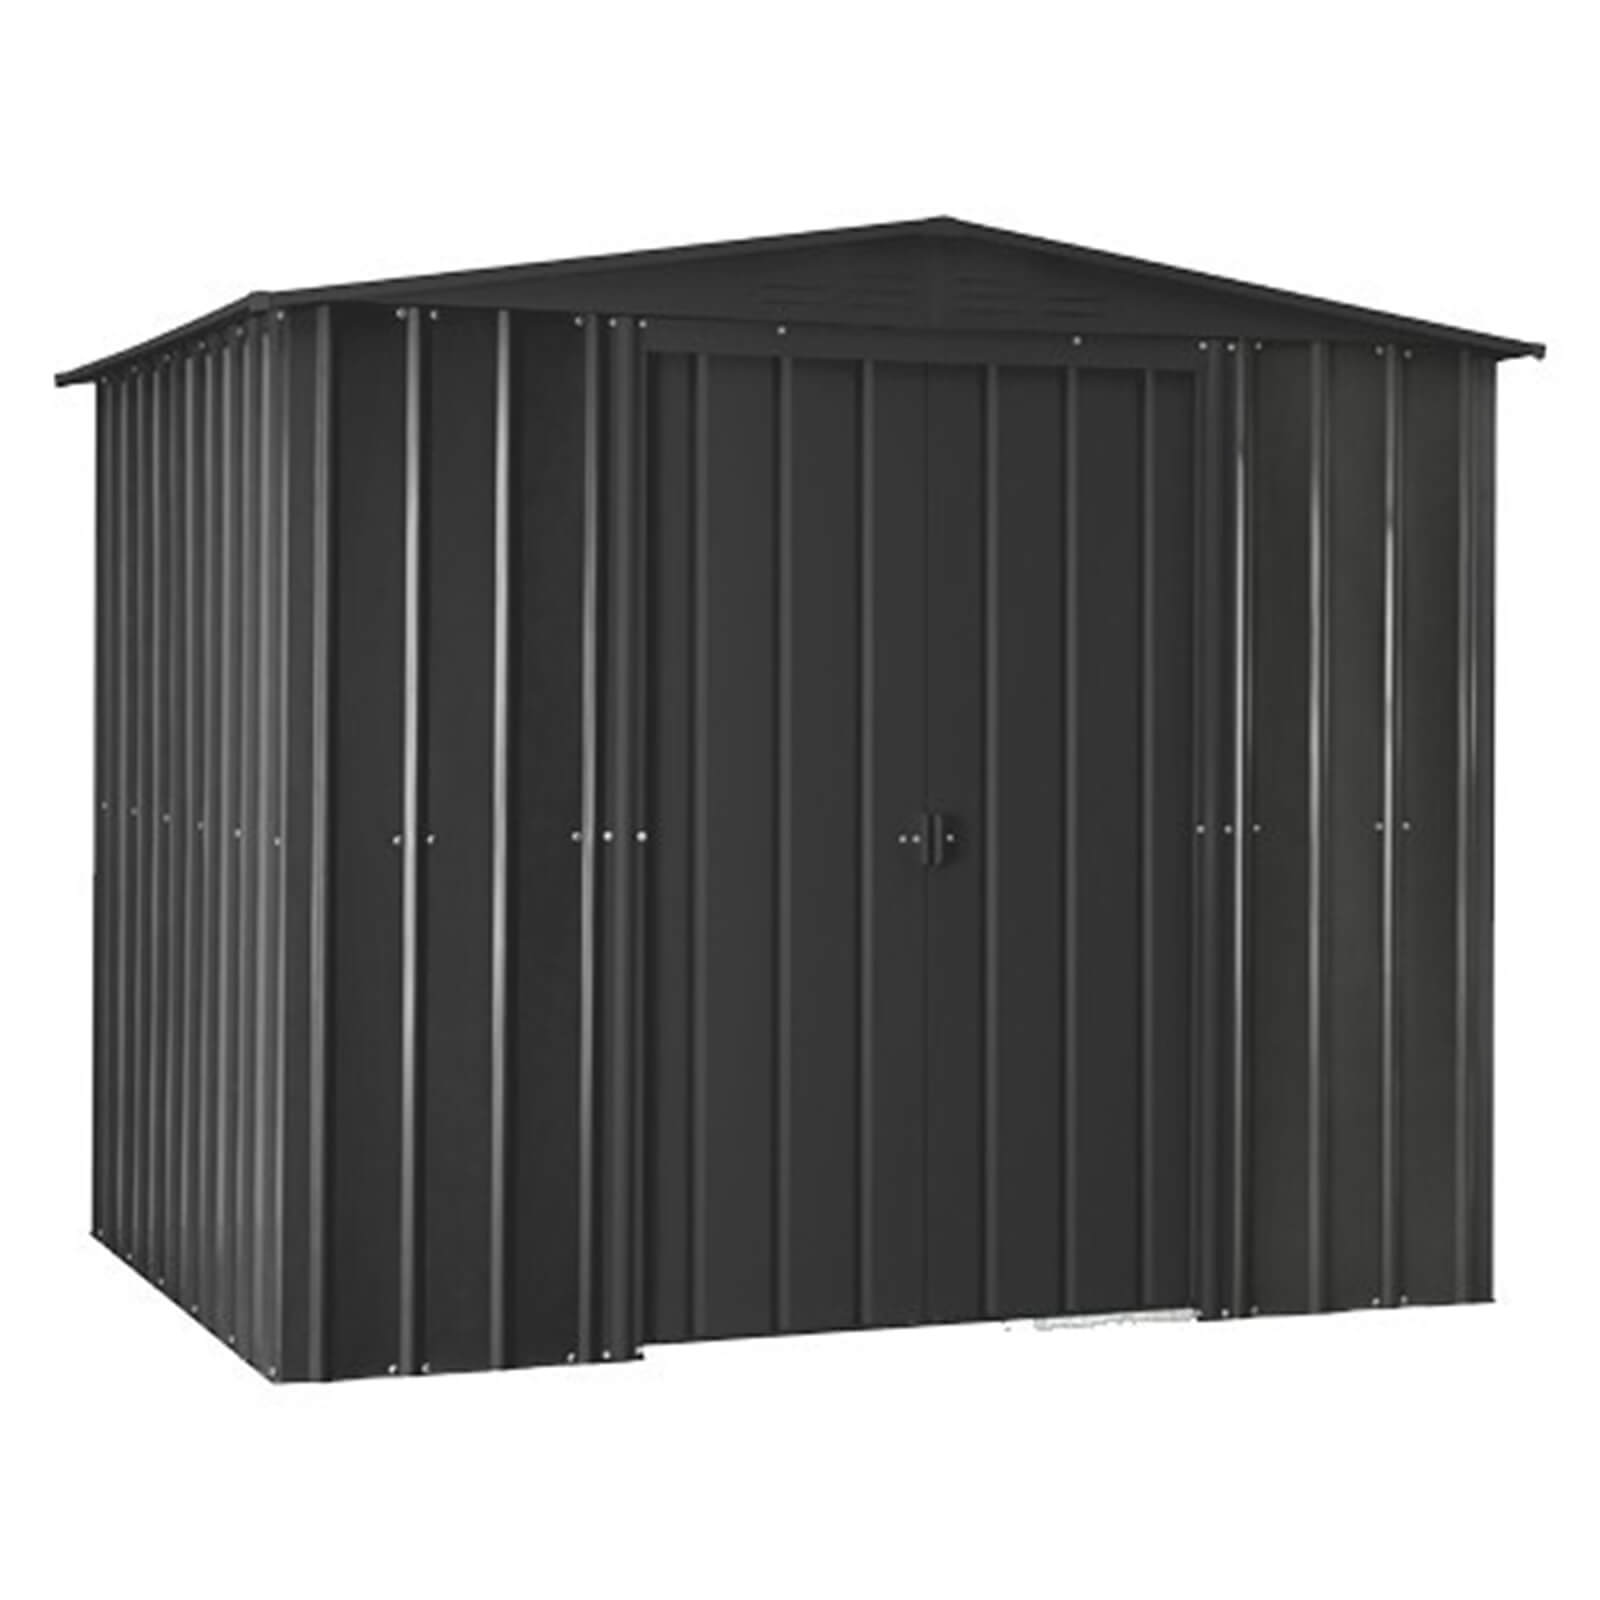 Lotus 8x5ft Metal Shed Solid - Anthracite Grey